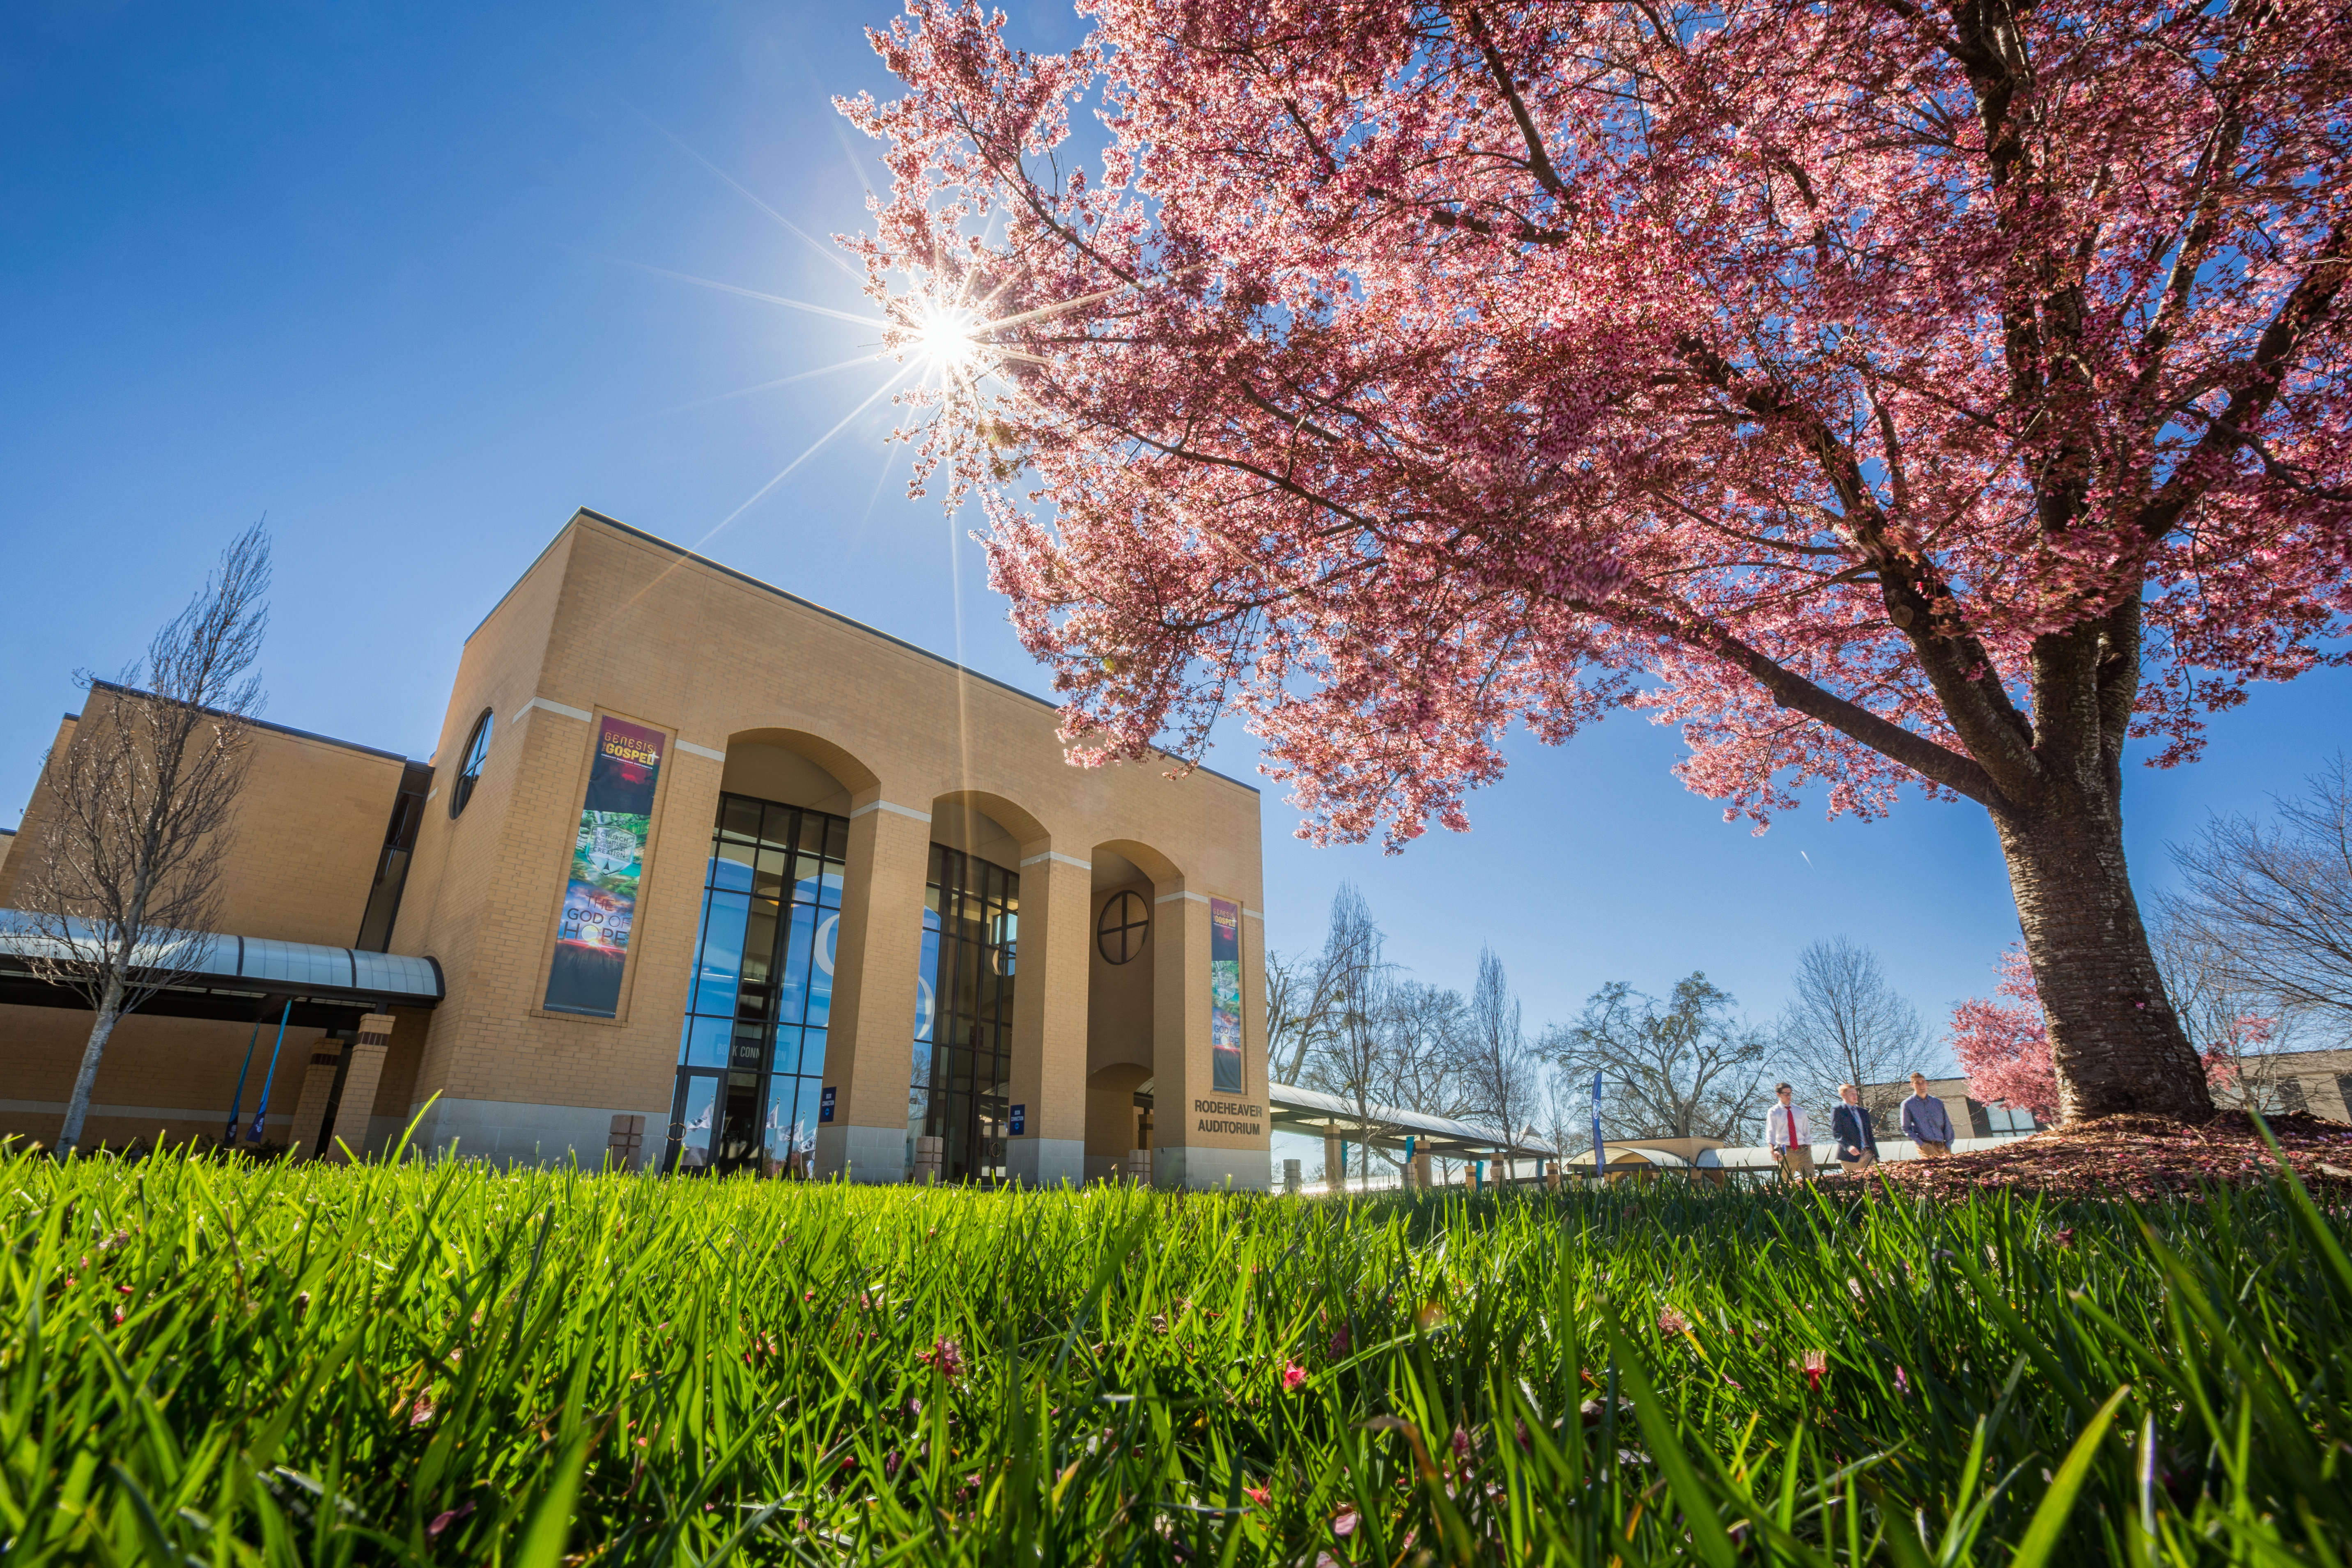 Rodeheaver Auditorium's new face is the centerpiece of the BJU campus (Photo by Derek Eckenroth)